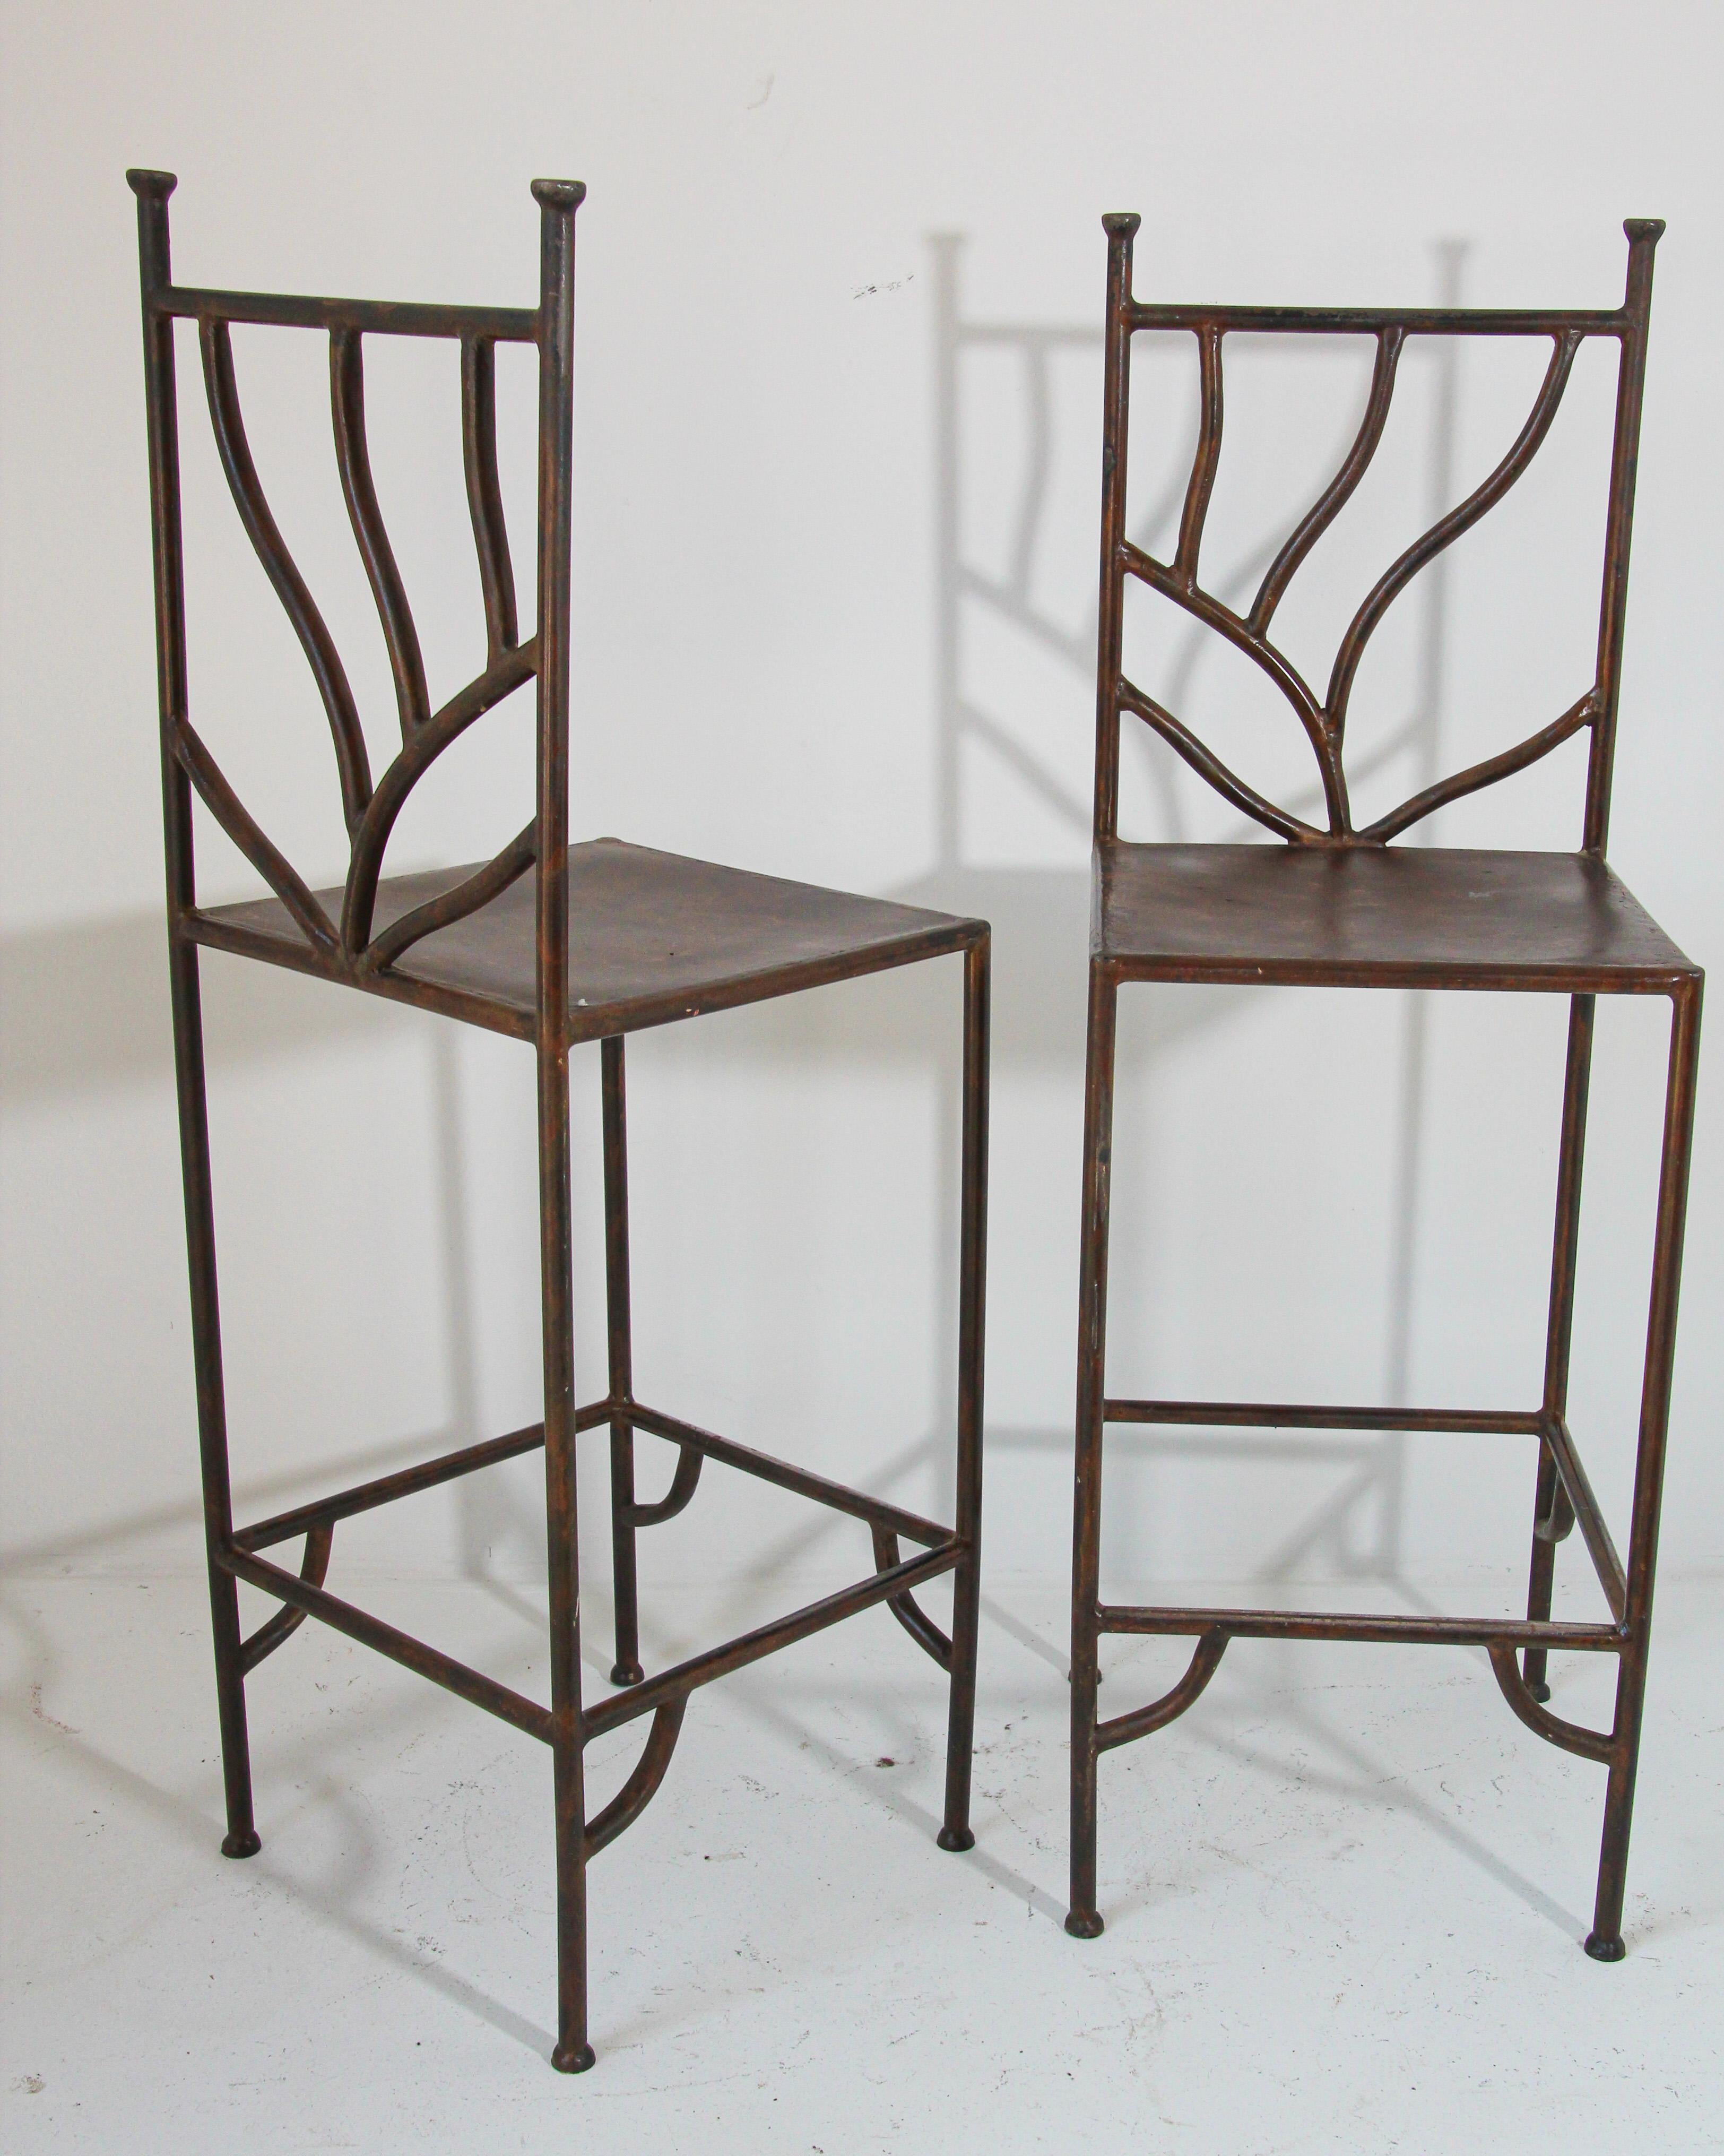 Custom made vintage Spanish Revival wrought iron barstools hand-crated stools featuring linear wrought iron frames seats of thick patinated metal.
Vintage rustic wrought iron hand forged barstools with back.
Set of two barstools, heavy iron Spanish